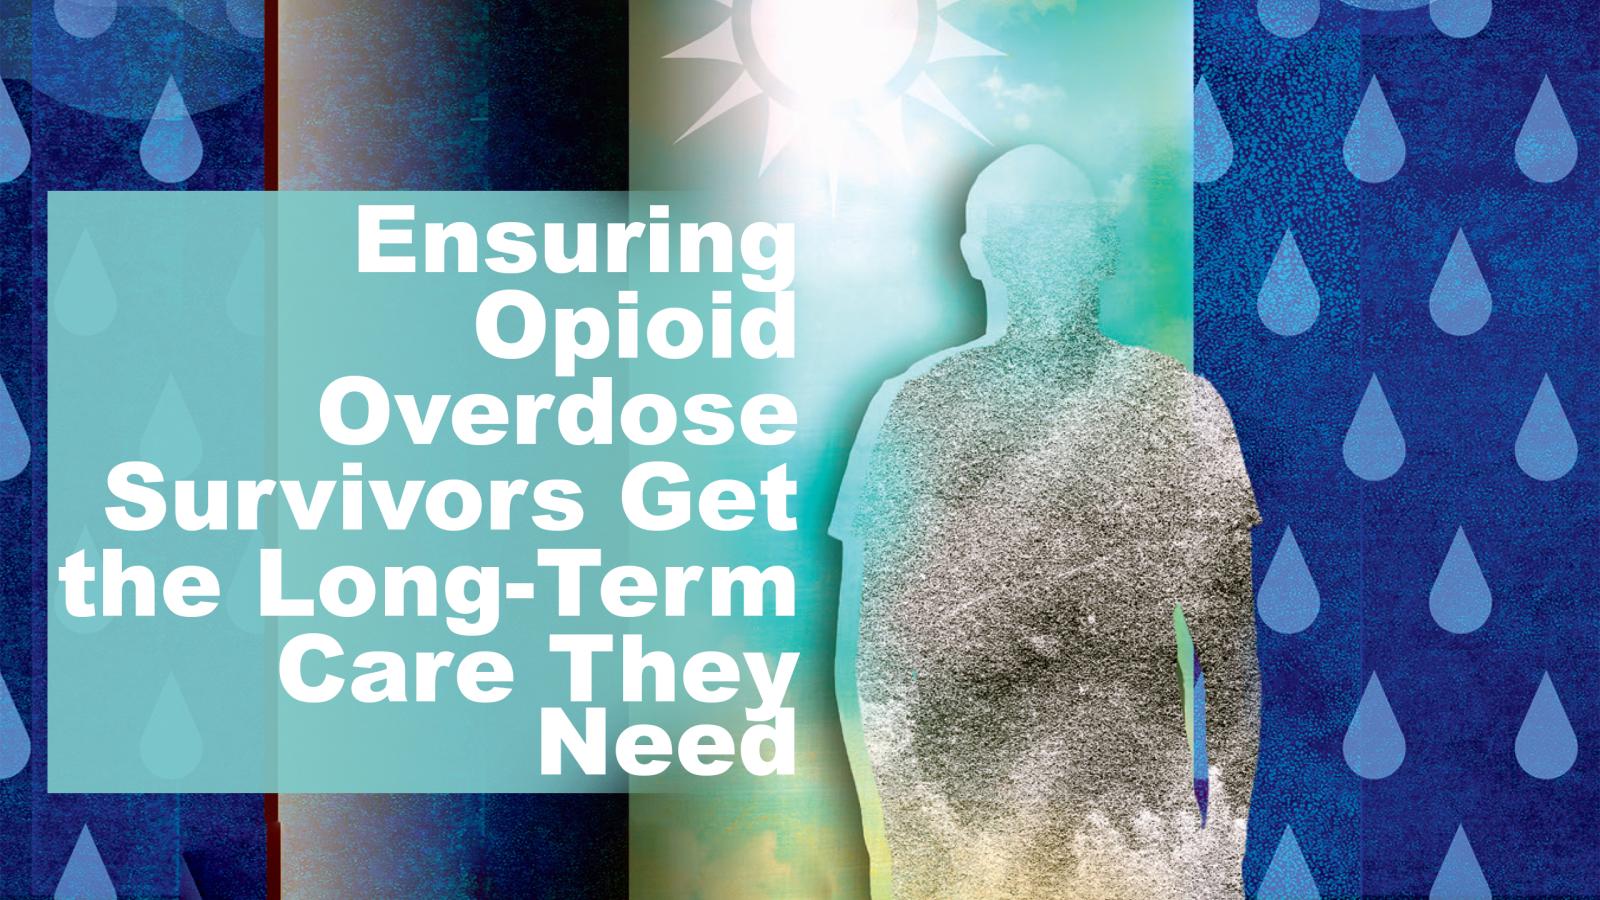 Graphic saying, "Ensuring opioid overdose survivors get the long-term care they need